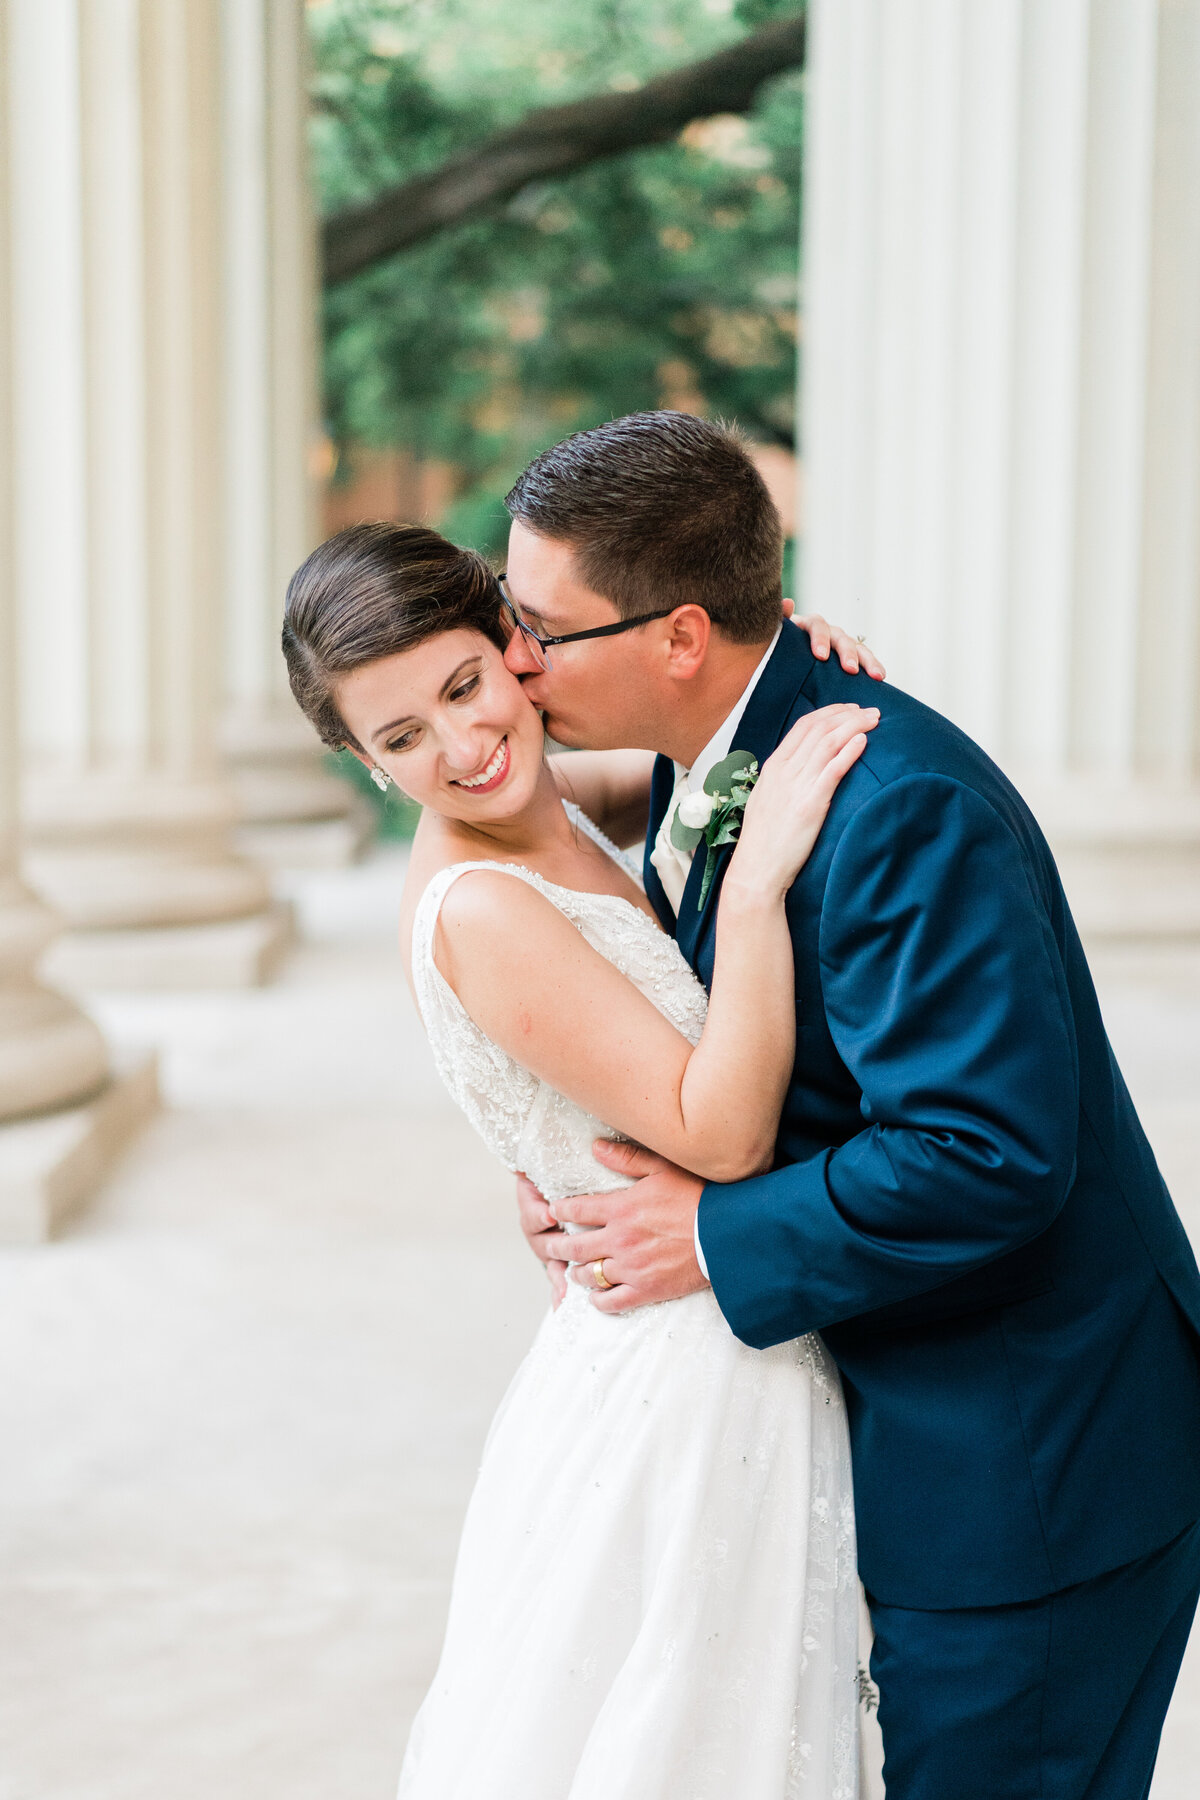 Groom kissing bride in front of columns